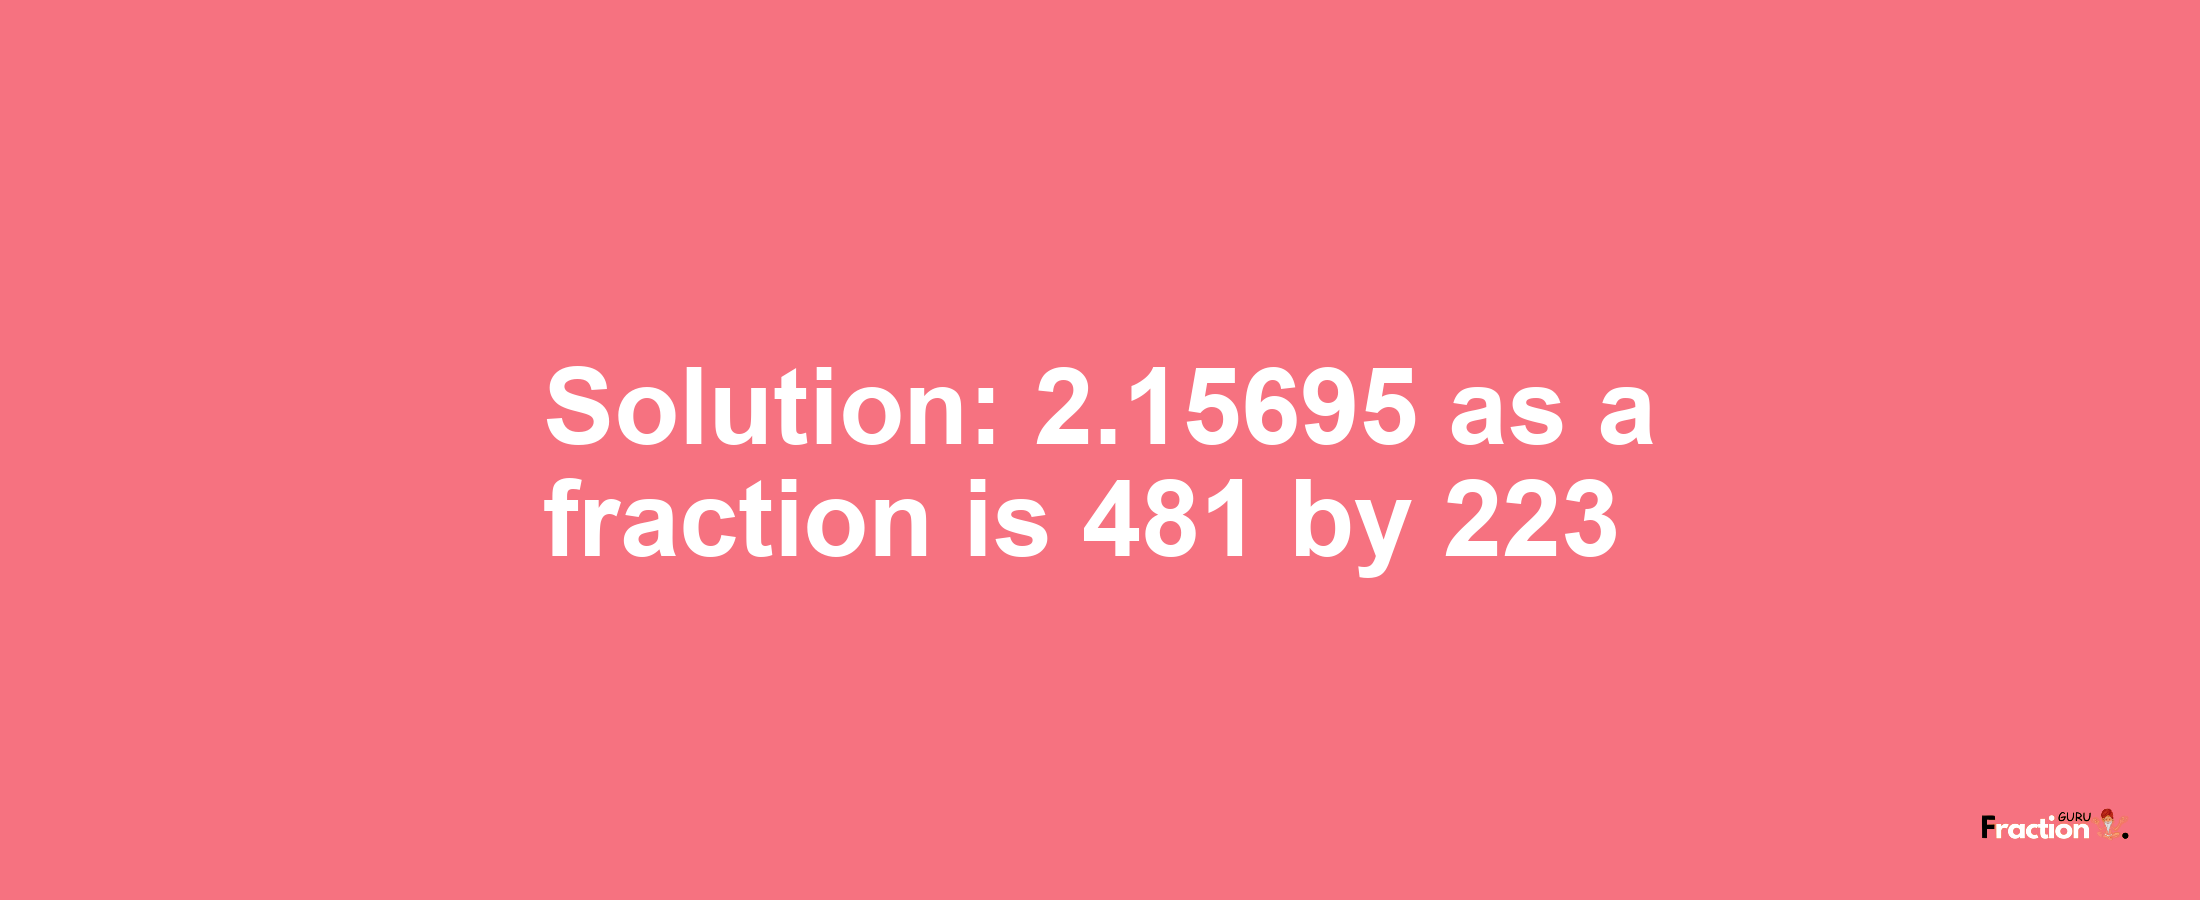 Solution:2.15695 as a fraction is 481/223